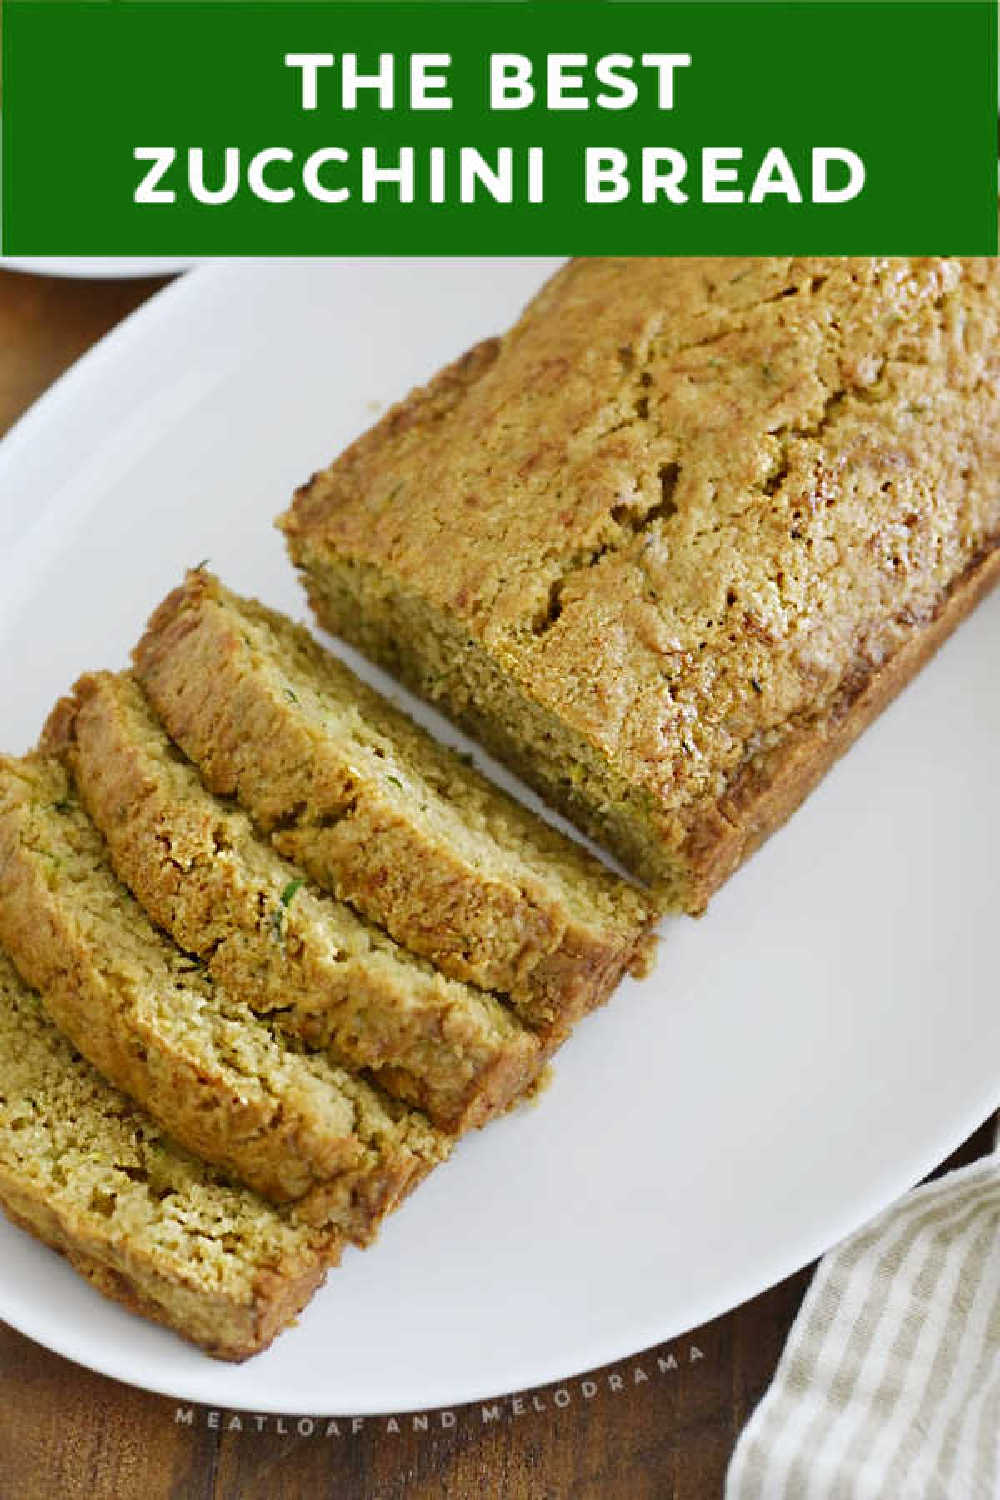 The BEST Zucchini Bread is moist, delicious, super easy to make and turns out perfect every time with this classic zucchini bread recipe. via @meamel